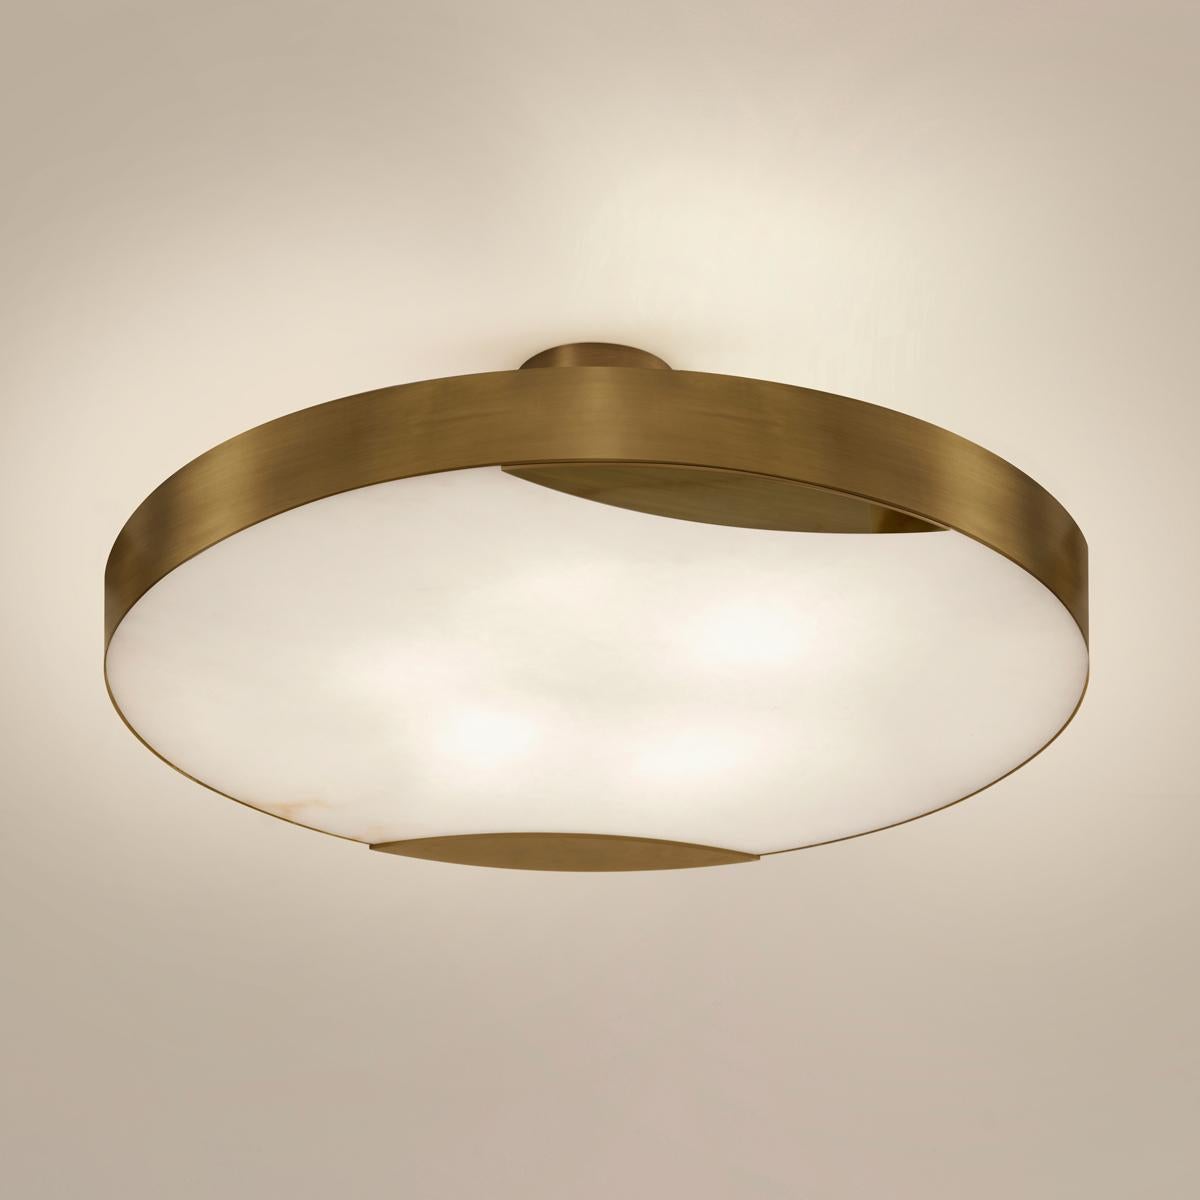 Contemporary Cloud N.1 Ceiling Light by Gaspare Asaro-Satin Brass Finish For Sale